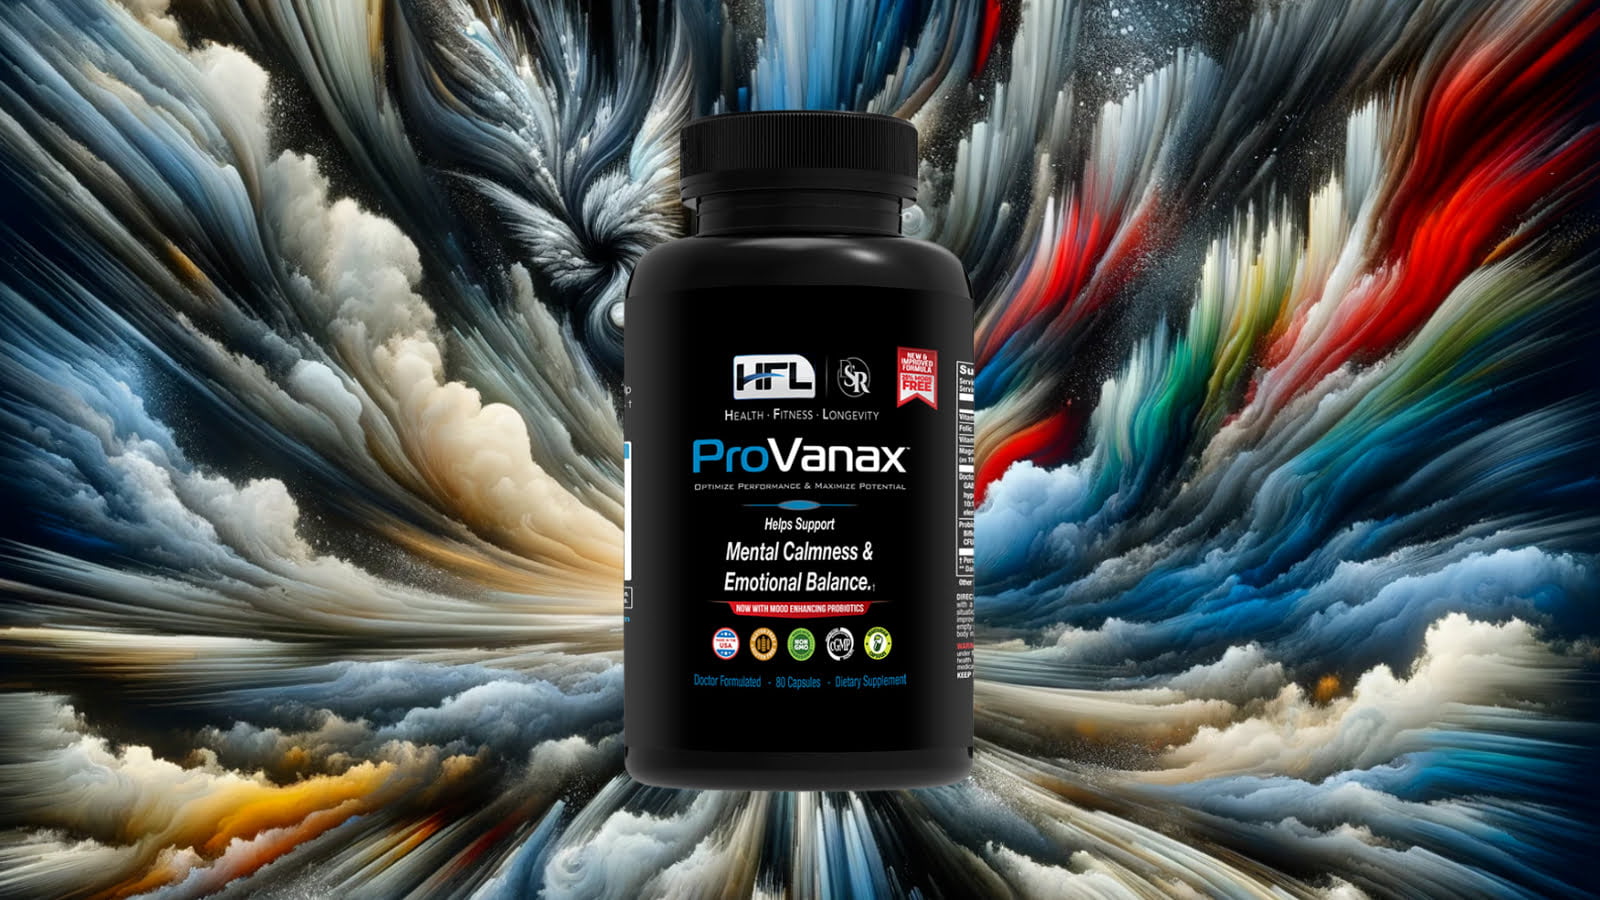 An overview of ProVanax ingredients, side effects, and purchasing options for mental well-being.